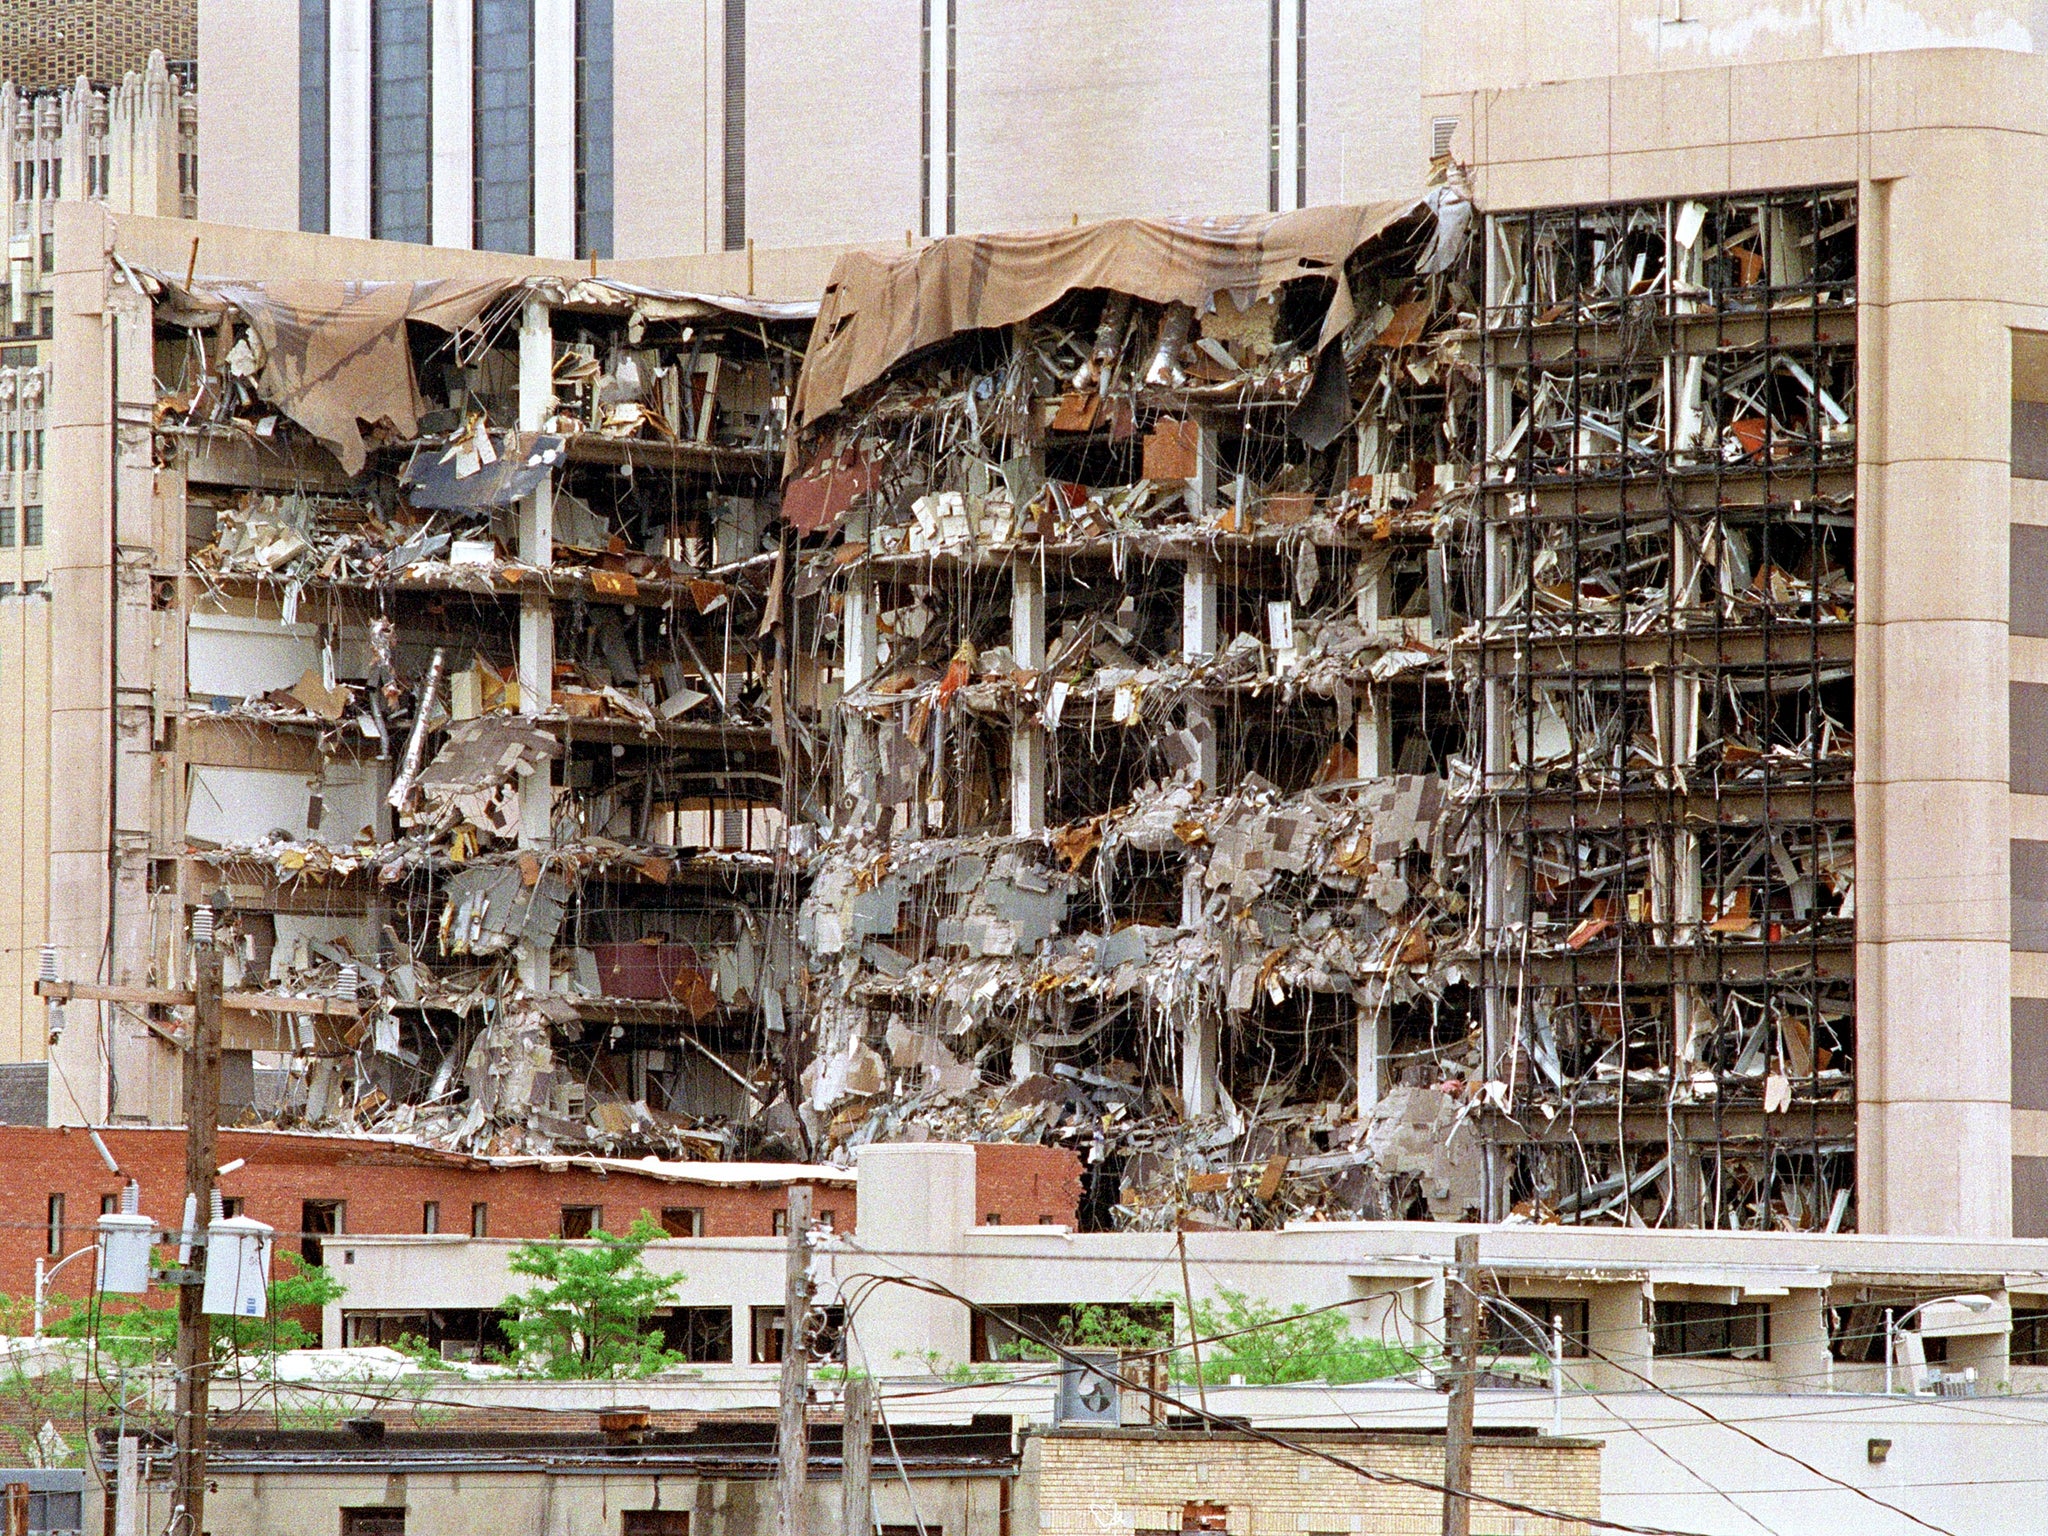 The Albert P Murrah Federal Building after it was bombed in Oklahoma City in 1995